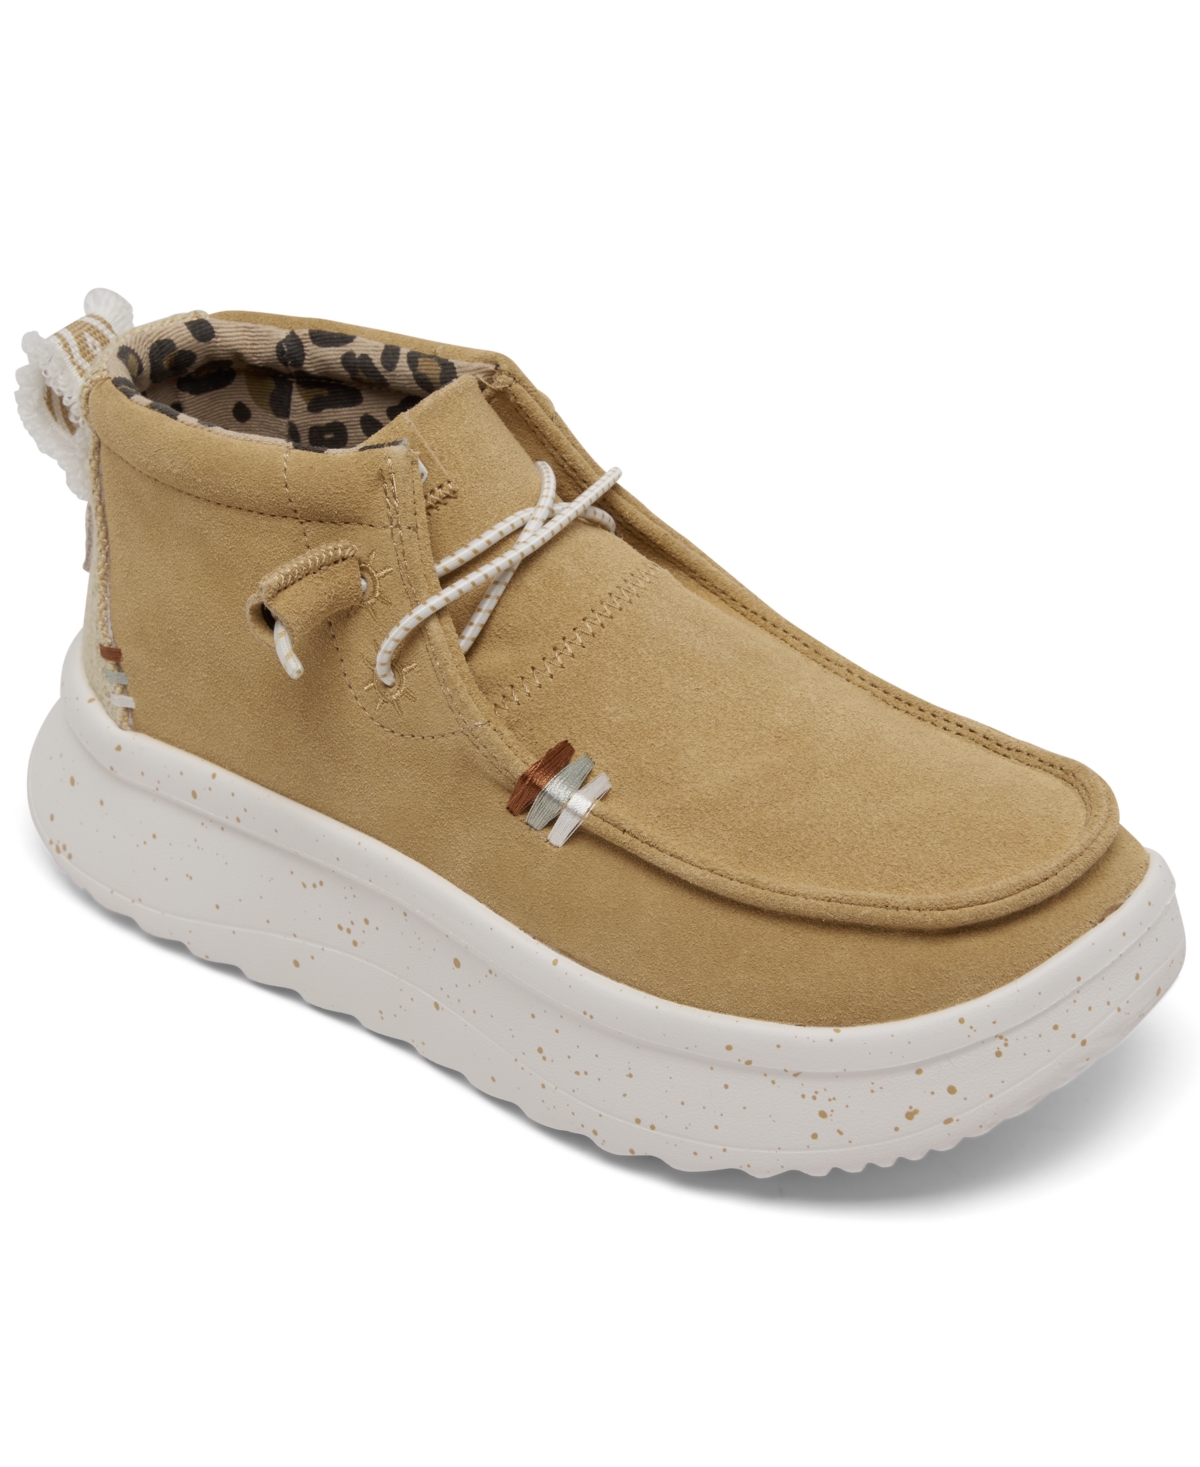 Women's Wendy Peak Hi Suede Casual Moccasin Sneakers from Finish Line - Tan